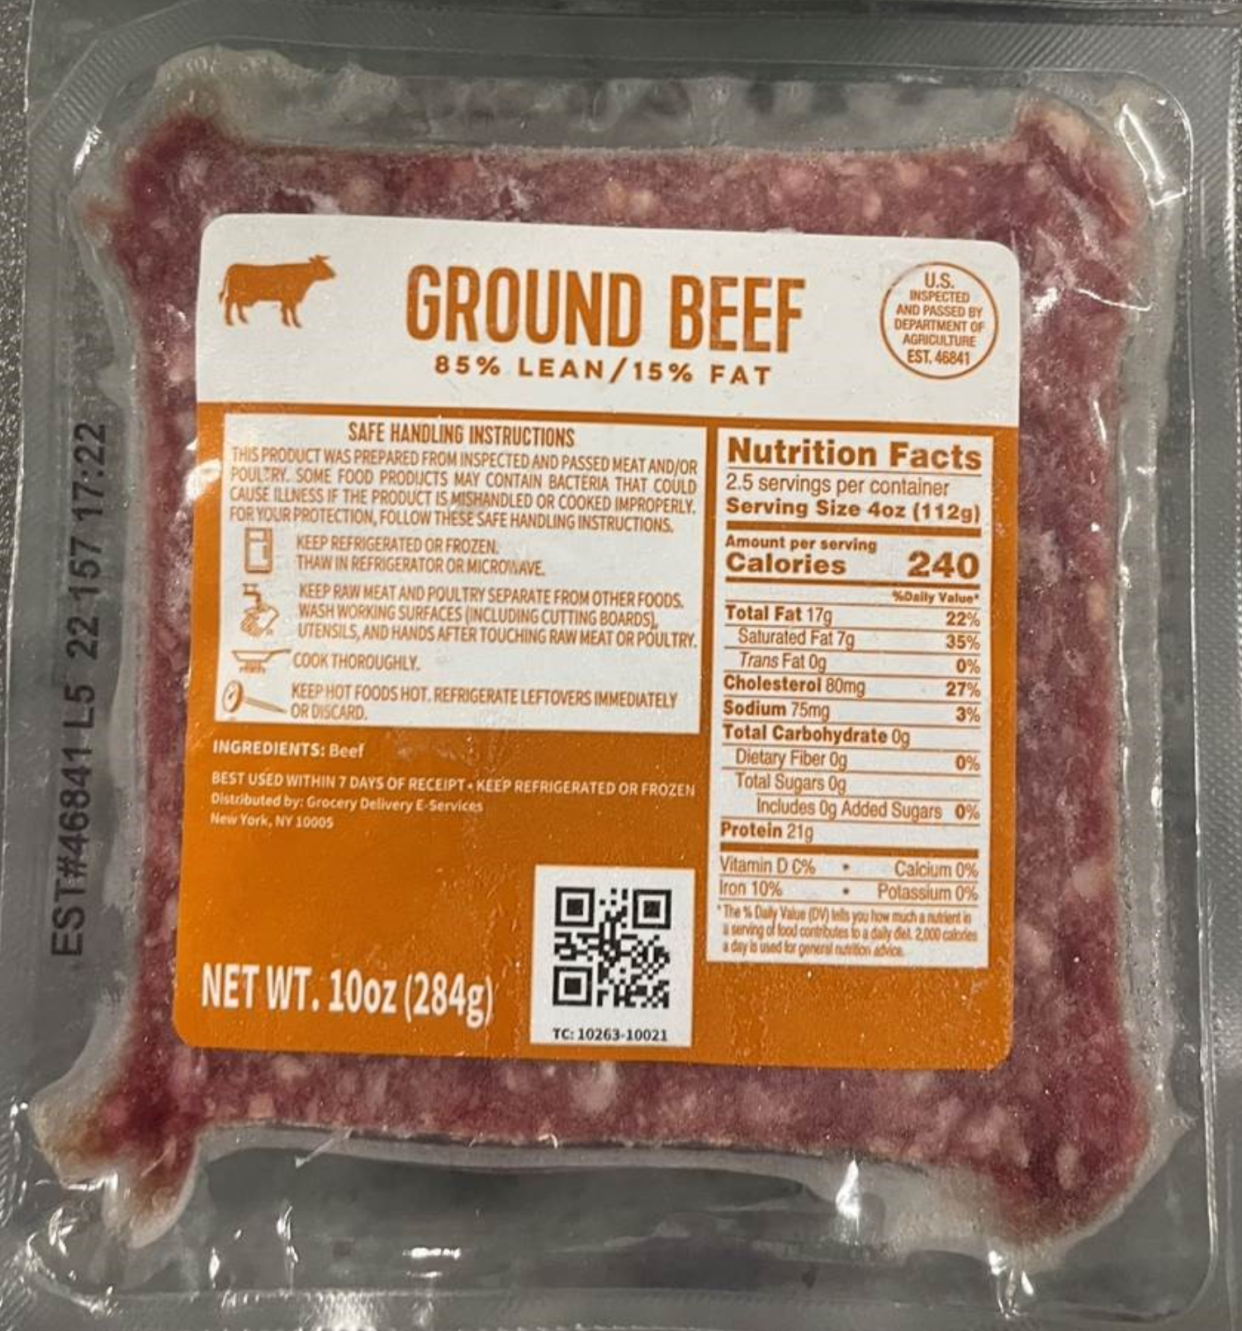 A 10-ounce package of ground. beef marked: 85% lean/15% fat.